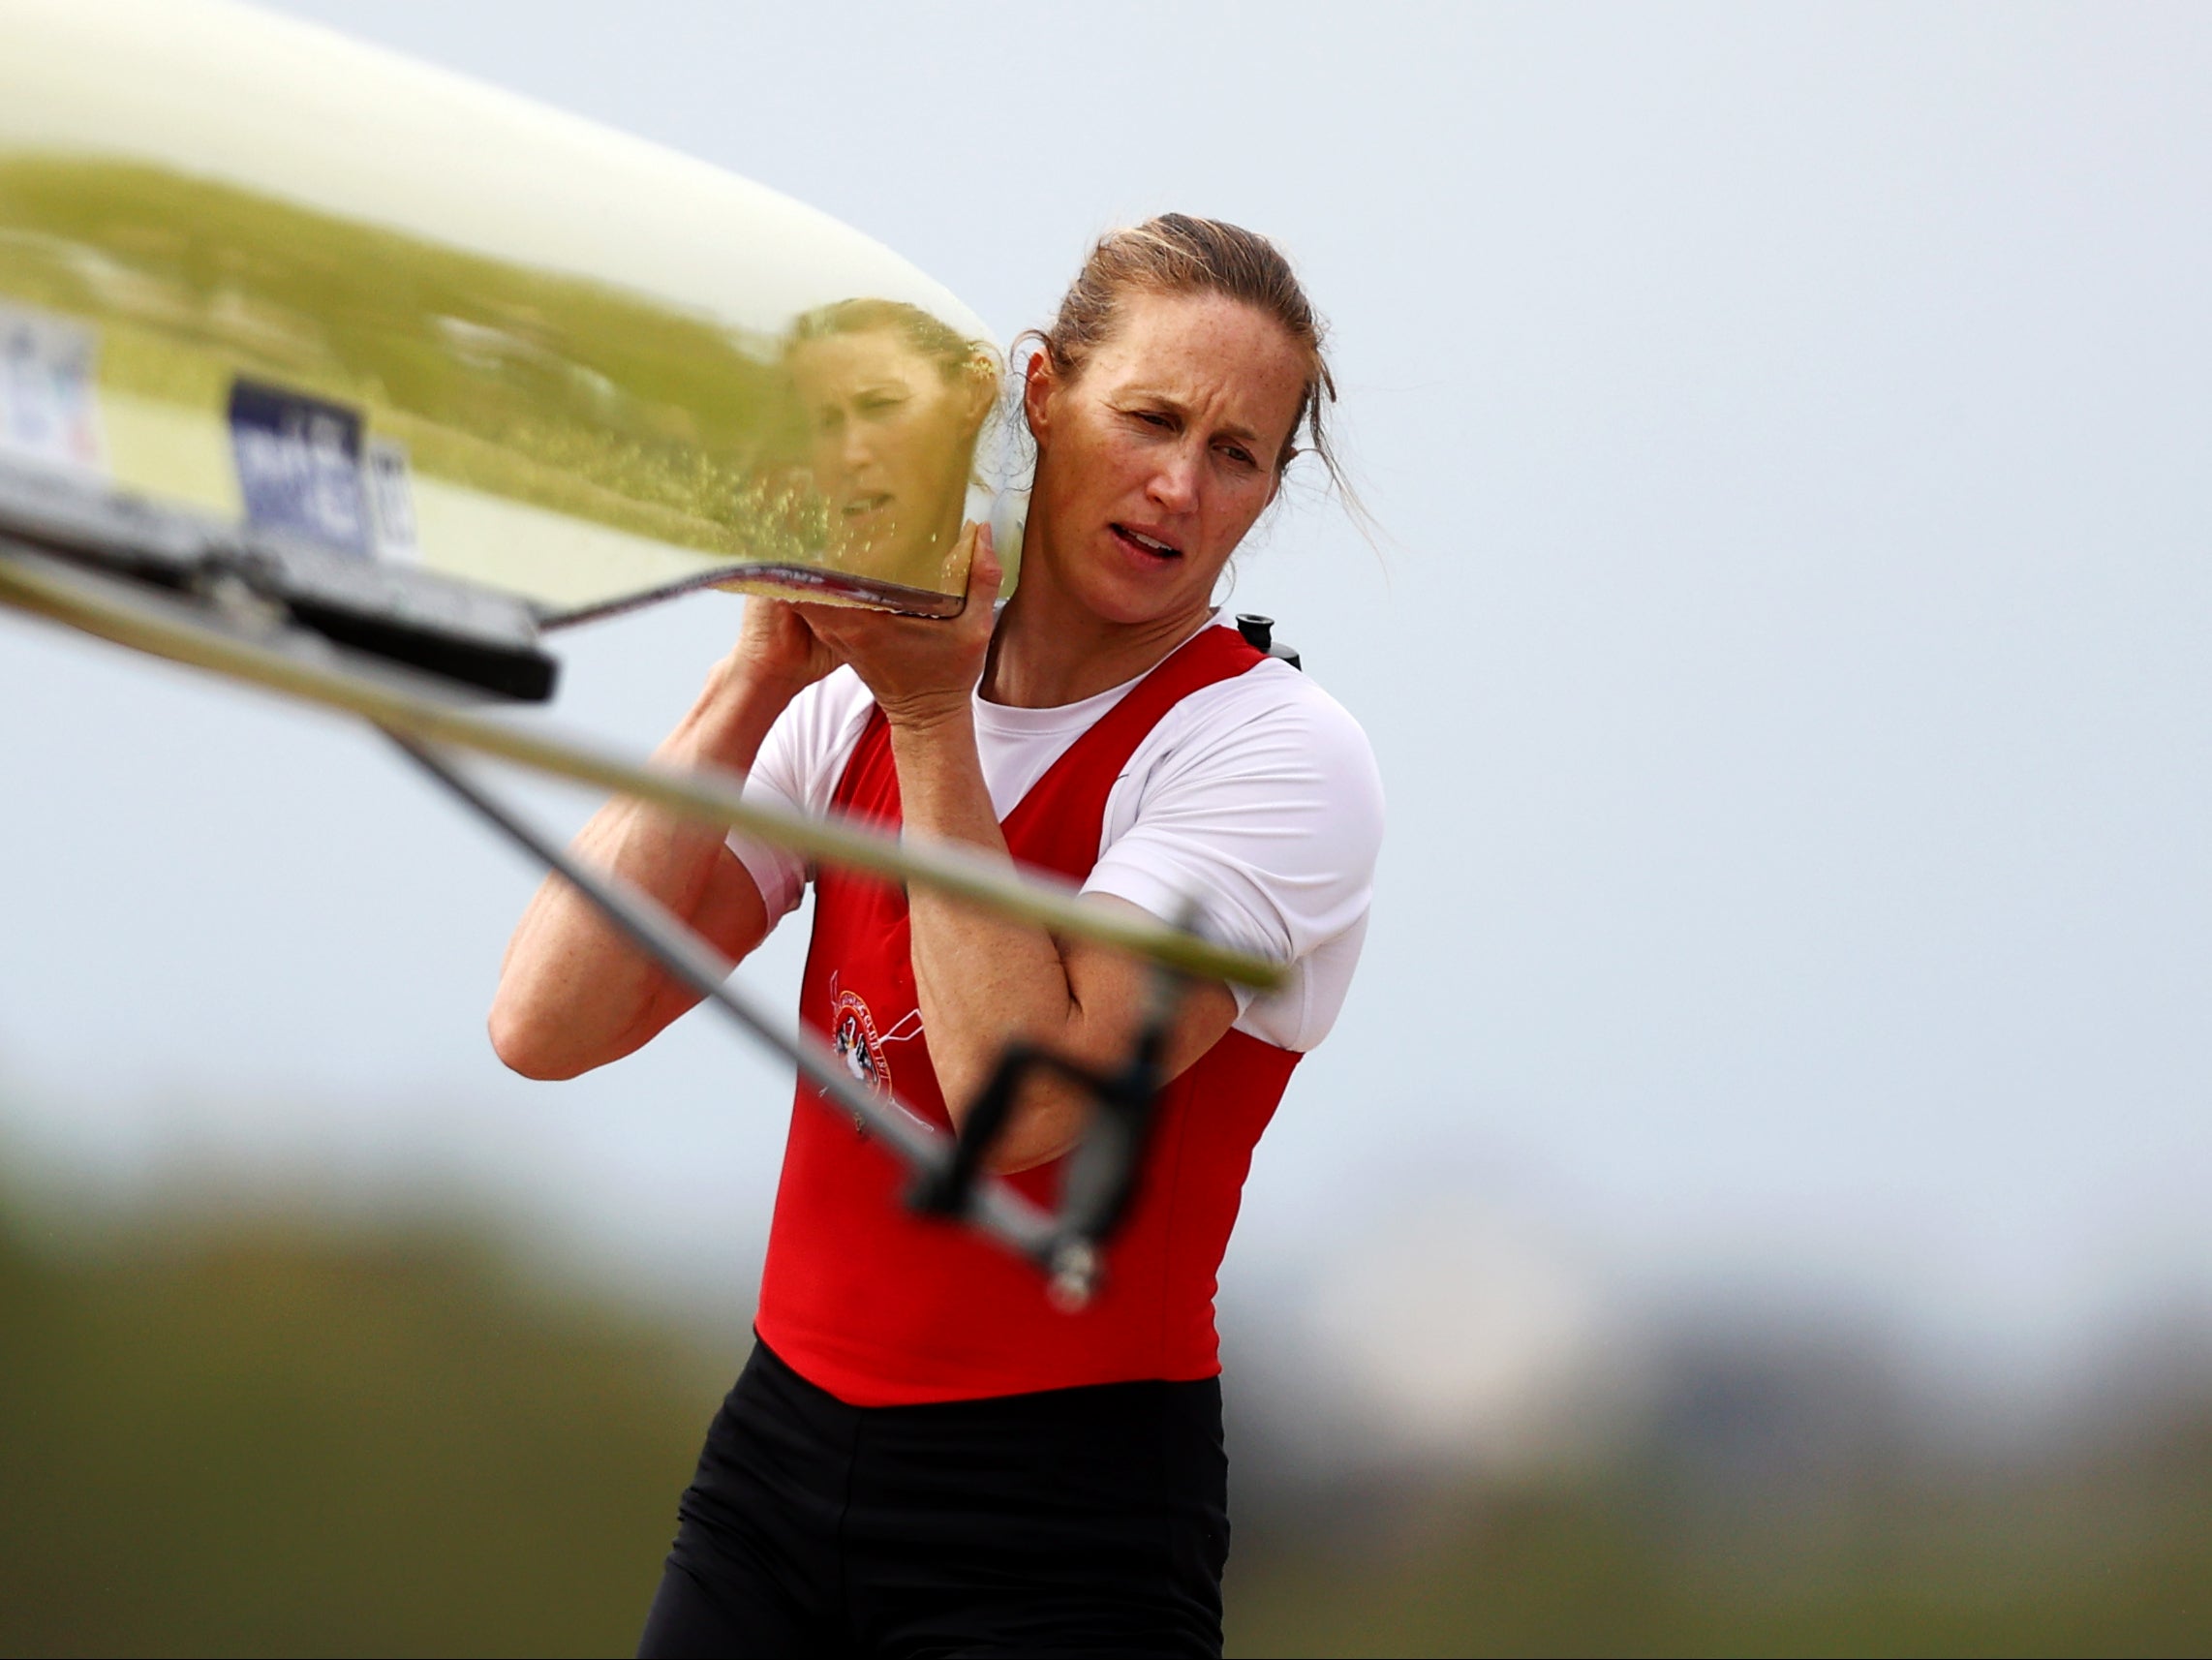 Helen Glover will go for a third Olympic gold medal in Paris